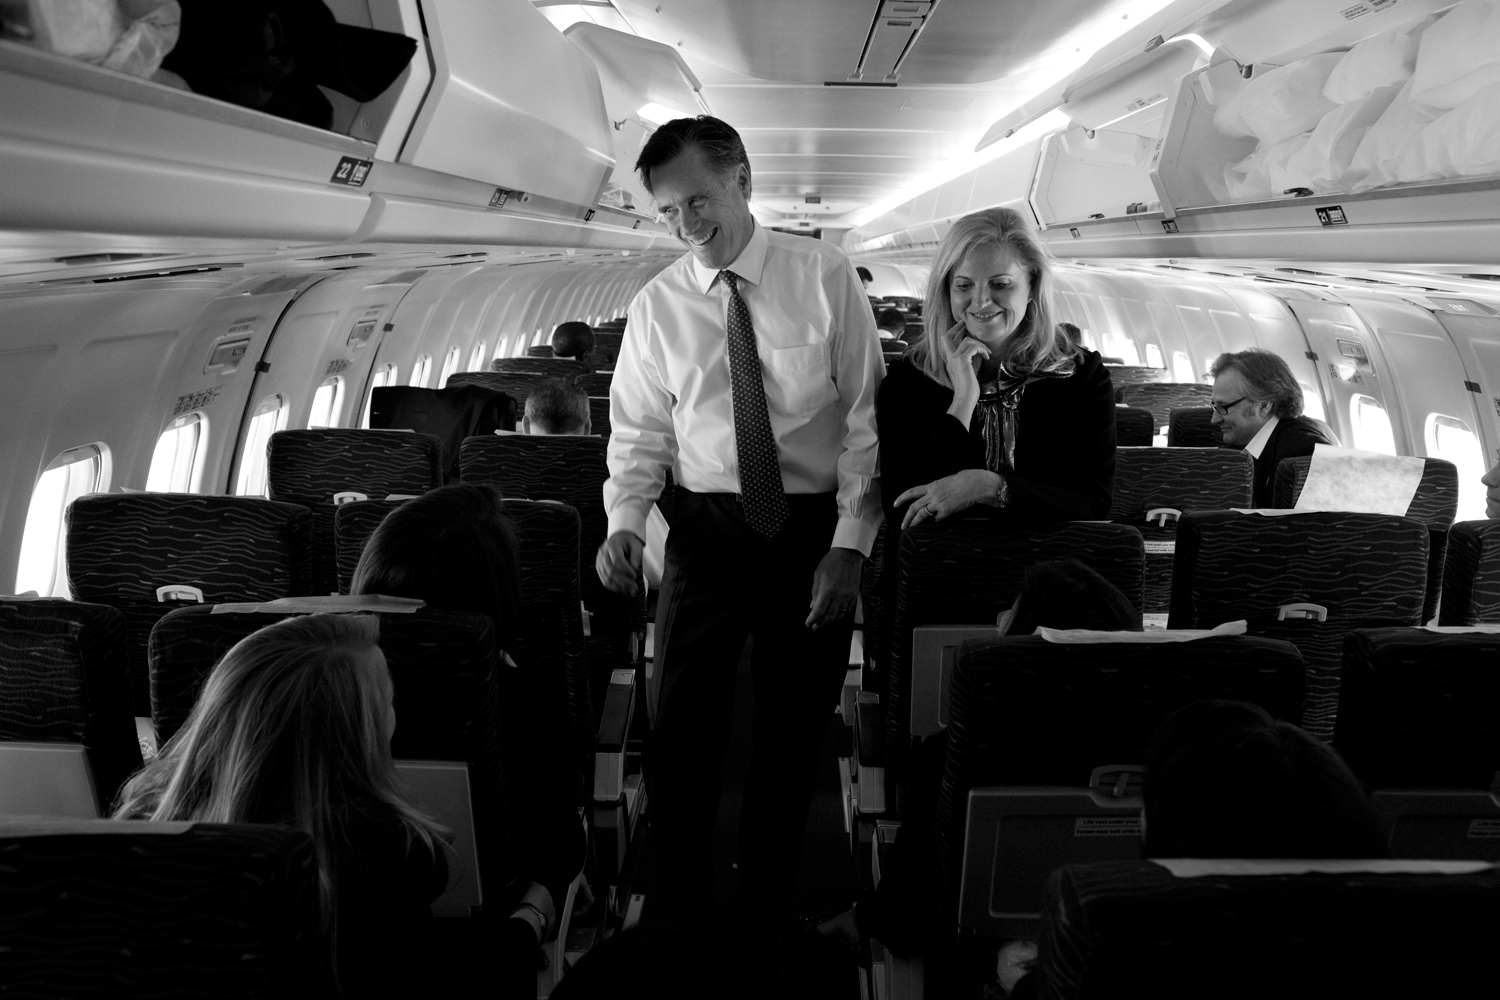 March 6, 2012. Republican presidential candidate Mitt Romney and his wife Ann talk to reporters on his campaign plane in Columbus, Ohio, before taking off for Boston.